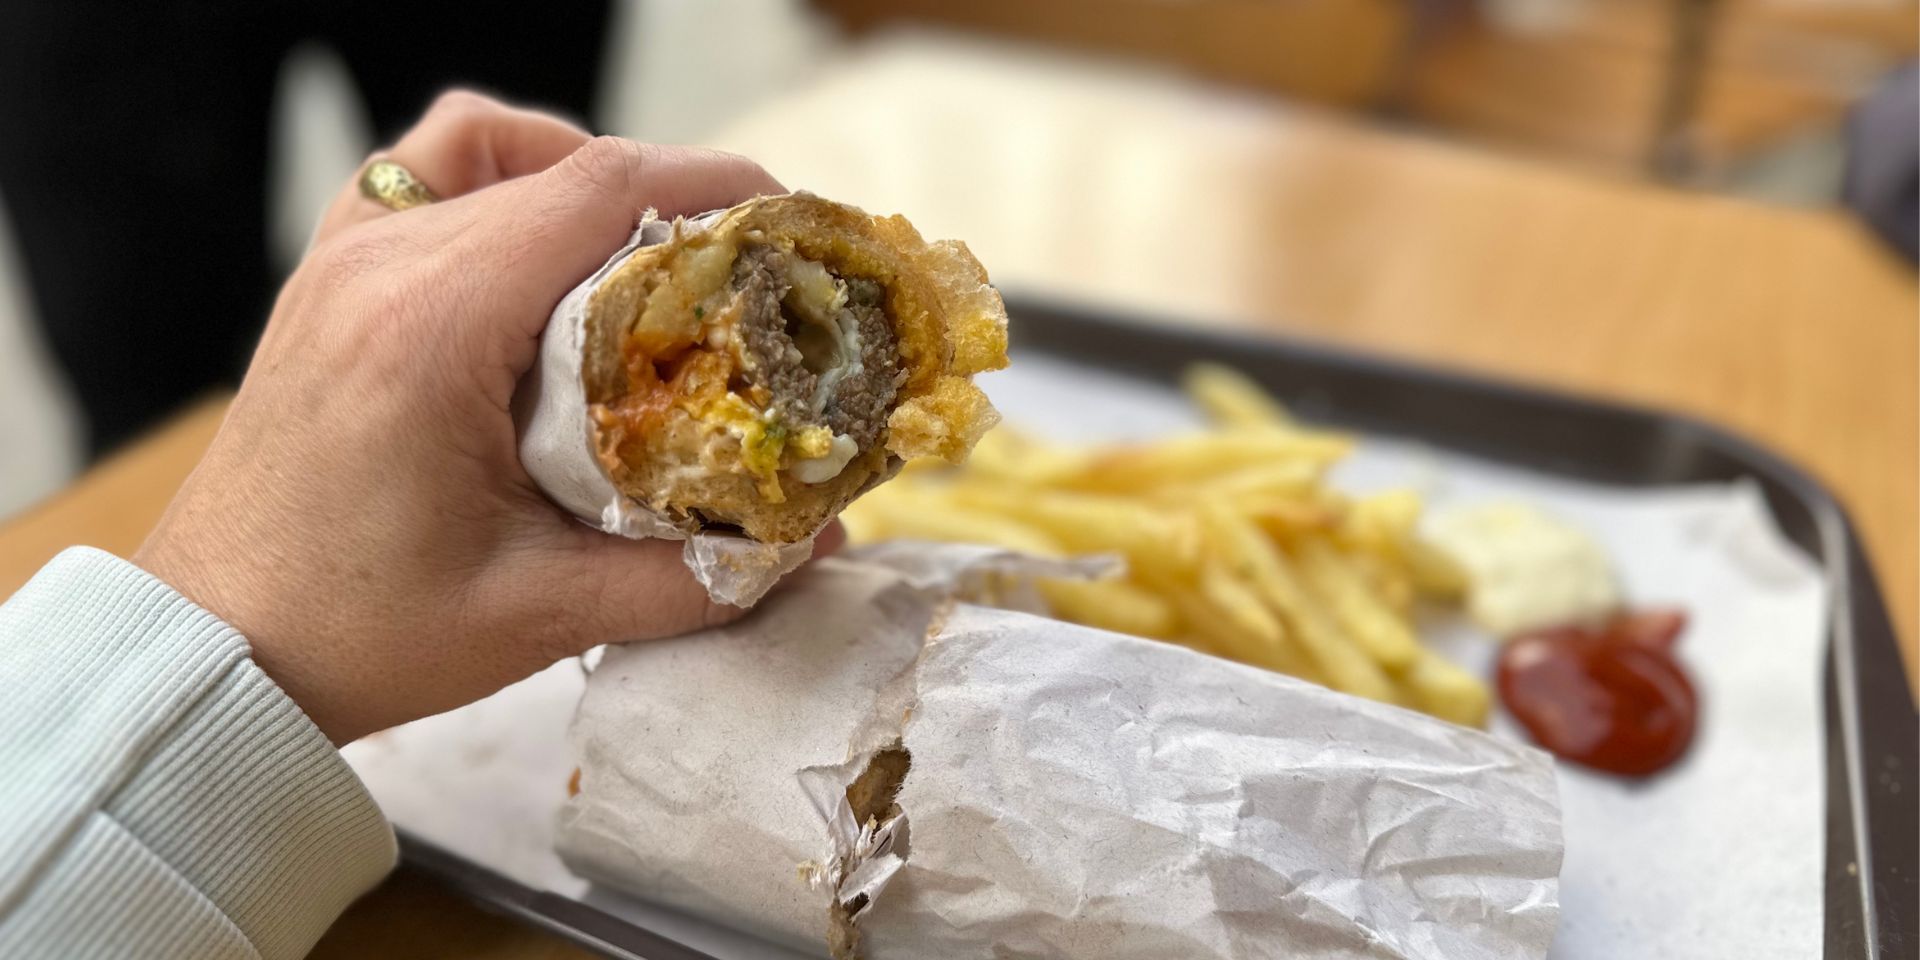 Close-up of a hand holding a half-eaten wrap with fries on a tray during a Tangier food tour.